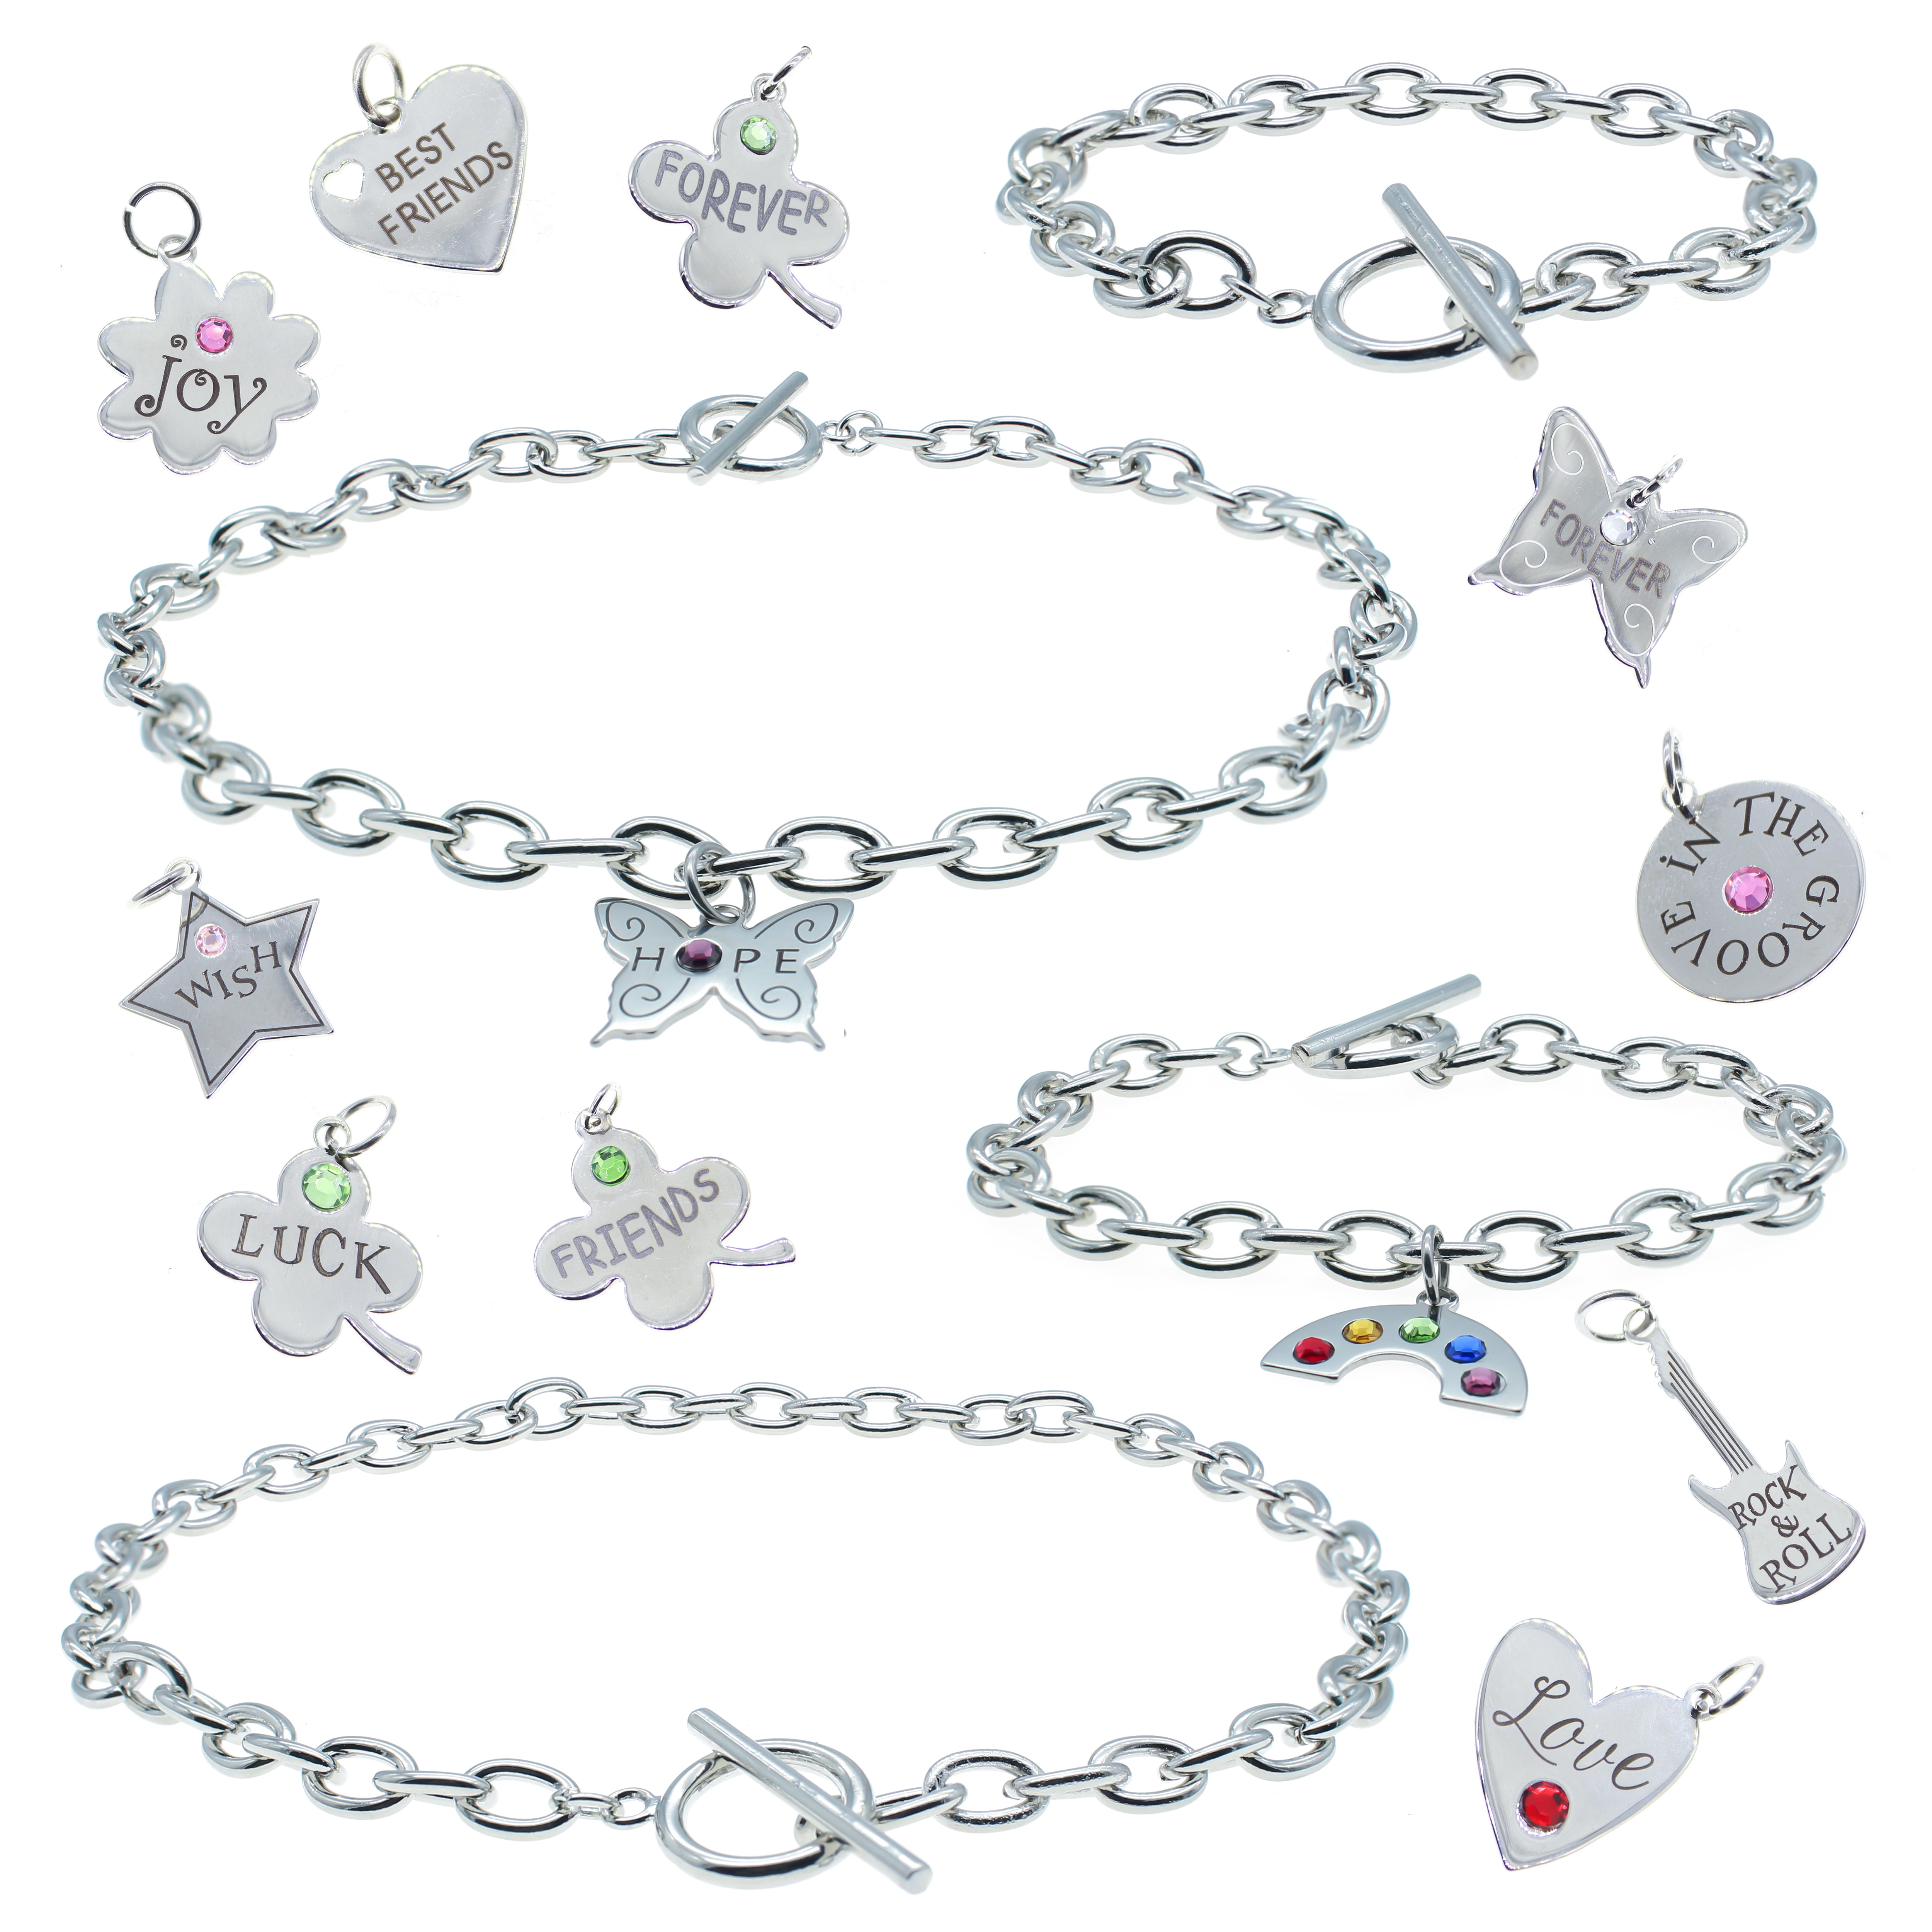 6 CHARM BRACELET BLANKS SILVER PLATED 8"  WITH FLOWER TOGGLE CLASP  TOP QUALITY 